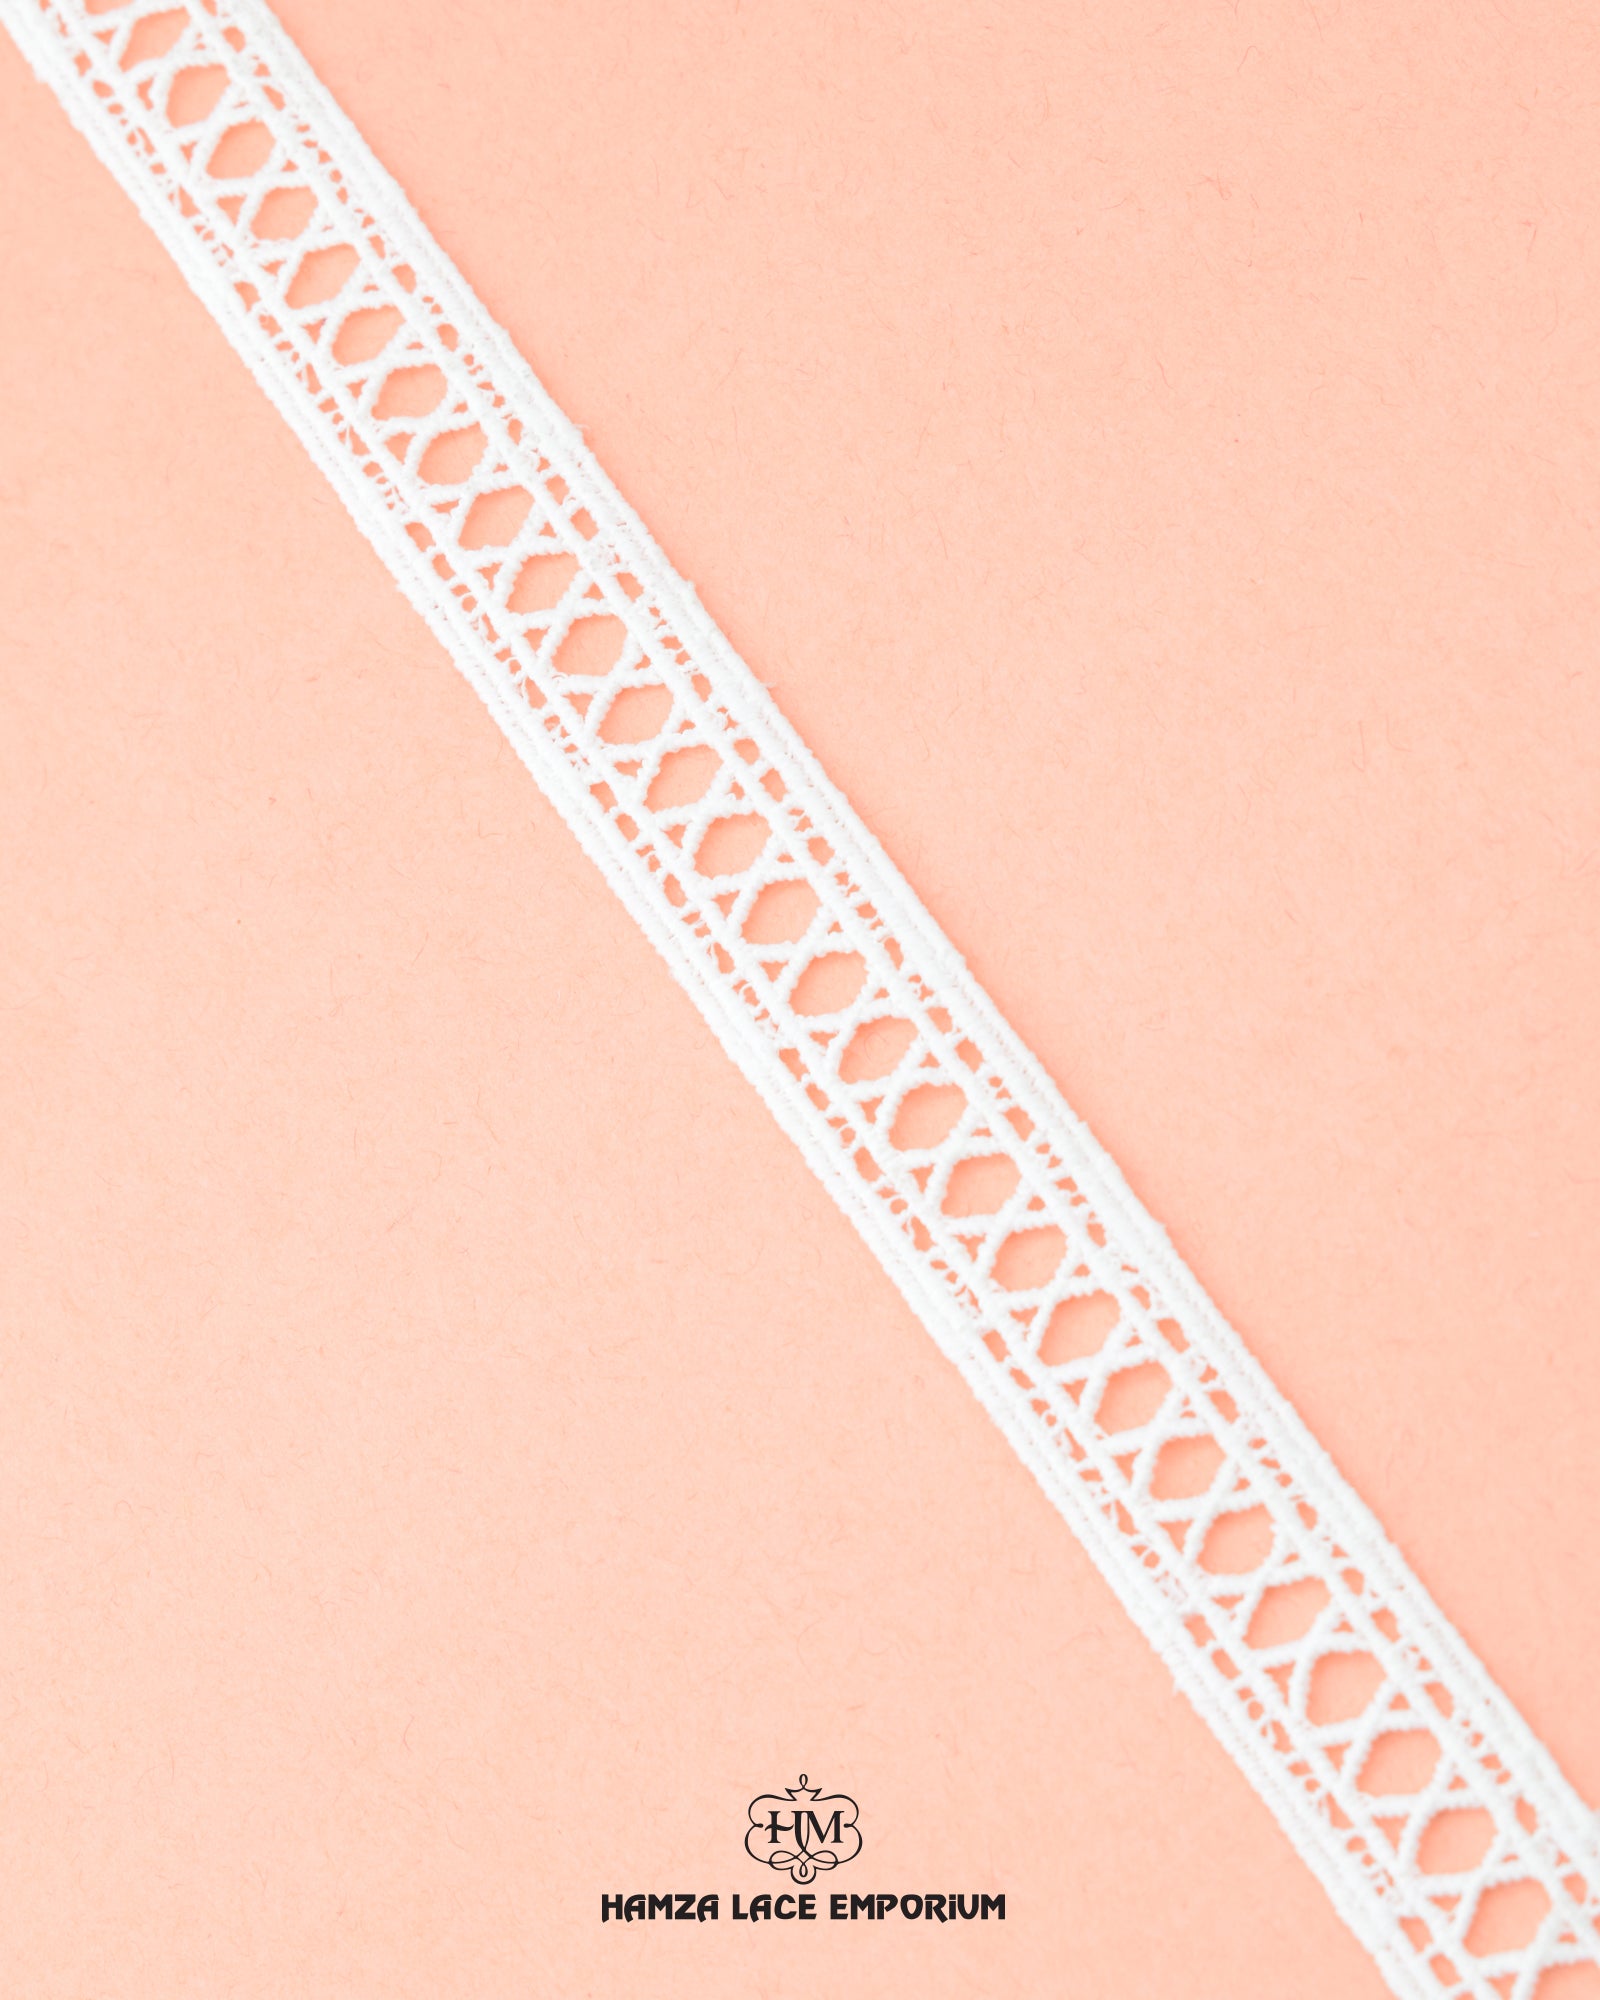 A white 'Two Side Filling Lace 335' with the 'Hamza Lace' sign and logo